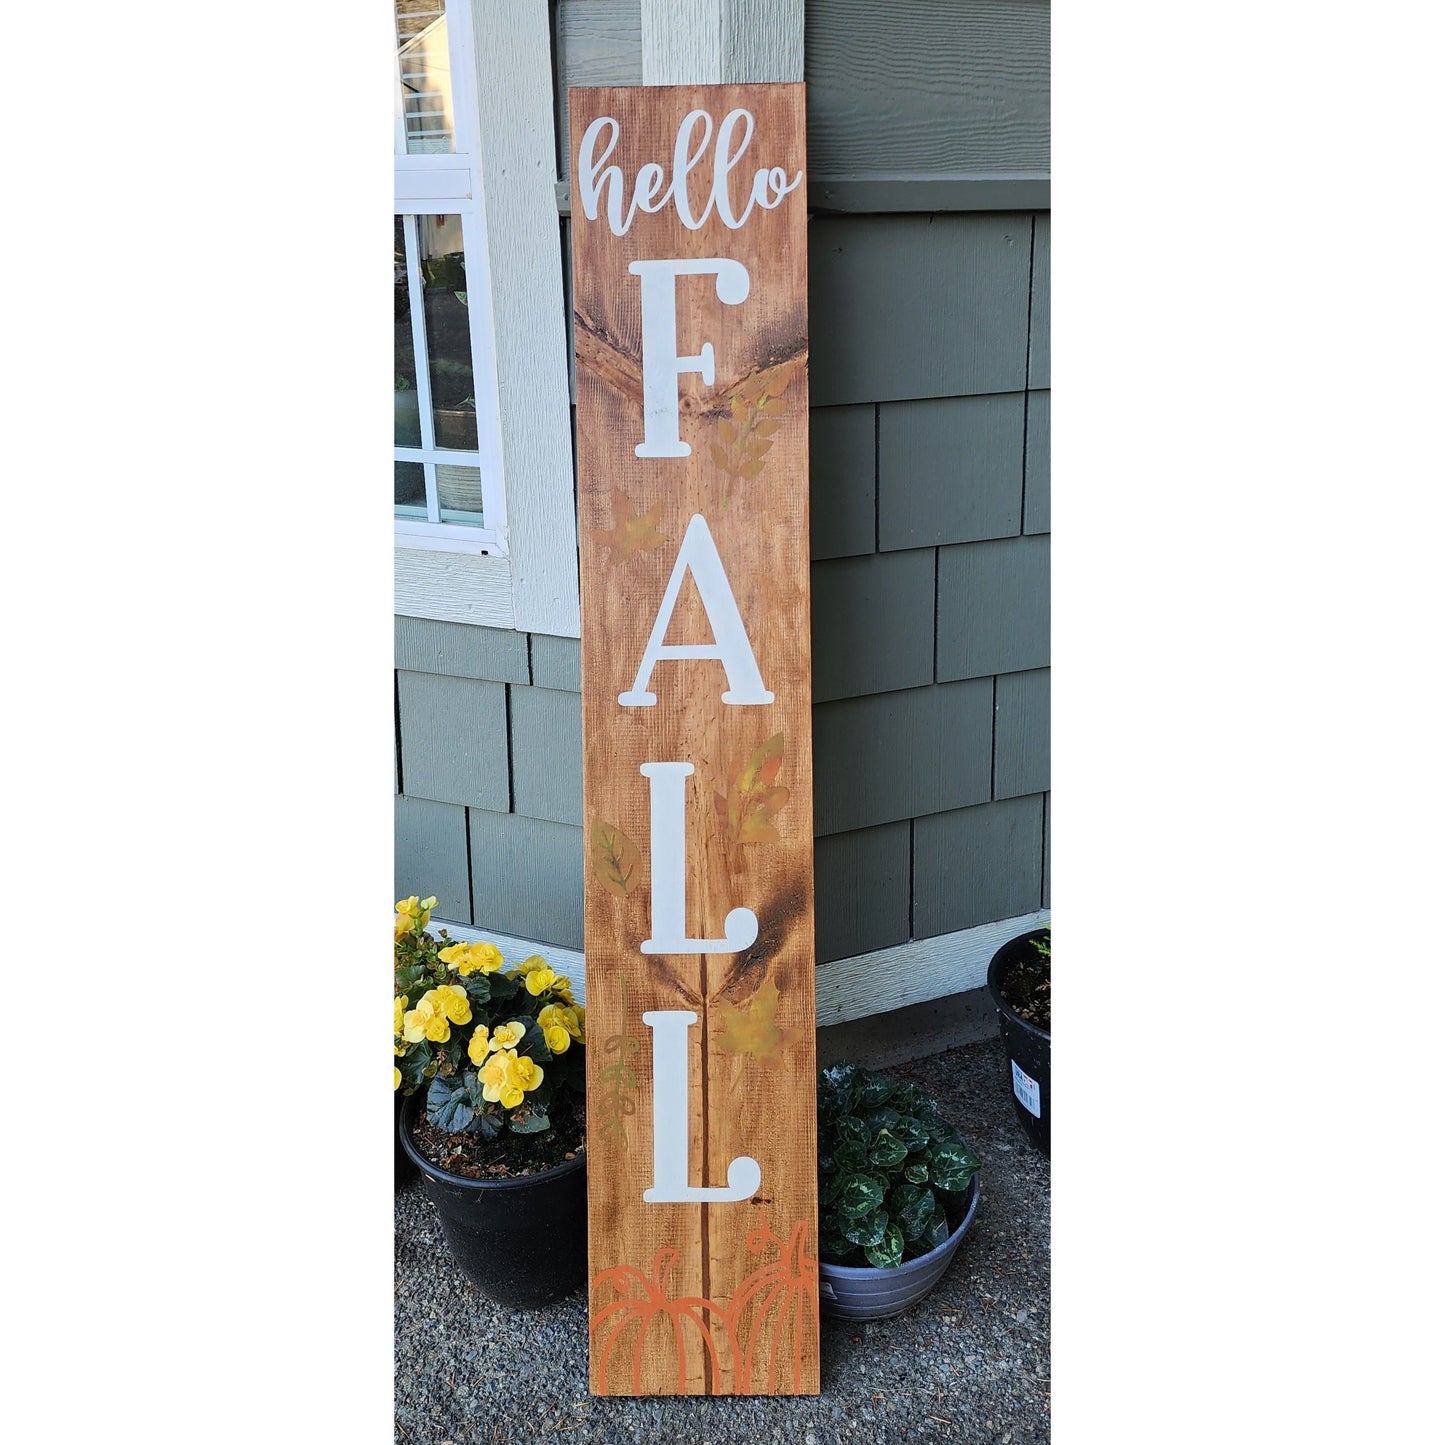 Hello Fall/Skeleton Welcome REVERSIBLE Porch Sign